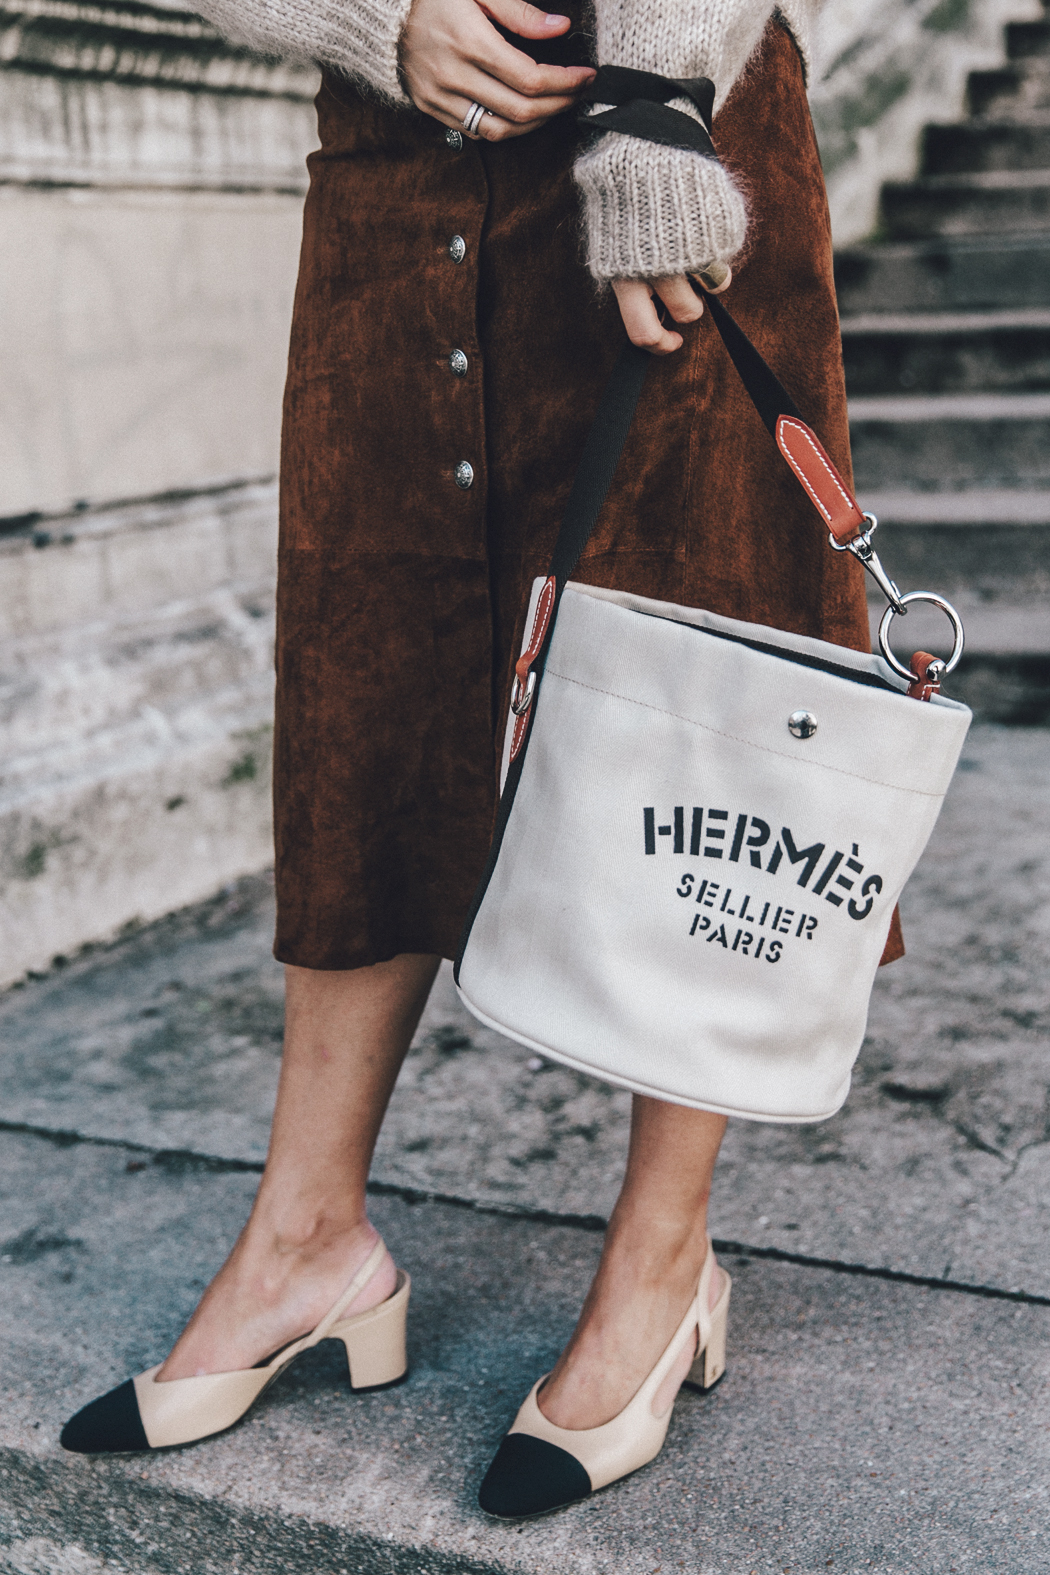 Vestiaire_Collective-Suede_Skirt-MIdi_Skirt-Hermes_Canvas_Bag-Chanel_Slingbacks-Outfit-Street_Style-35